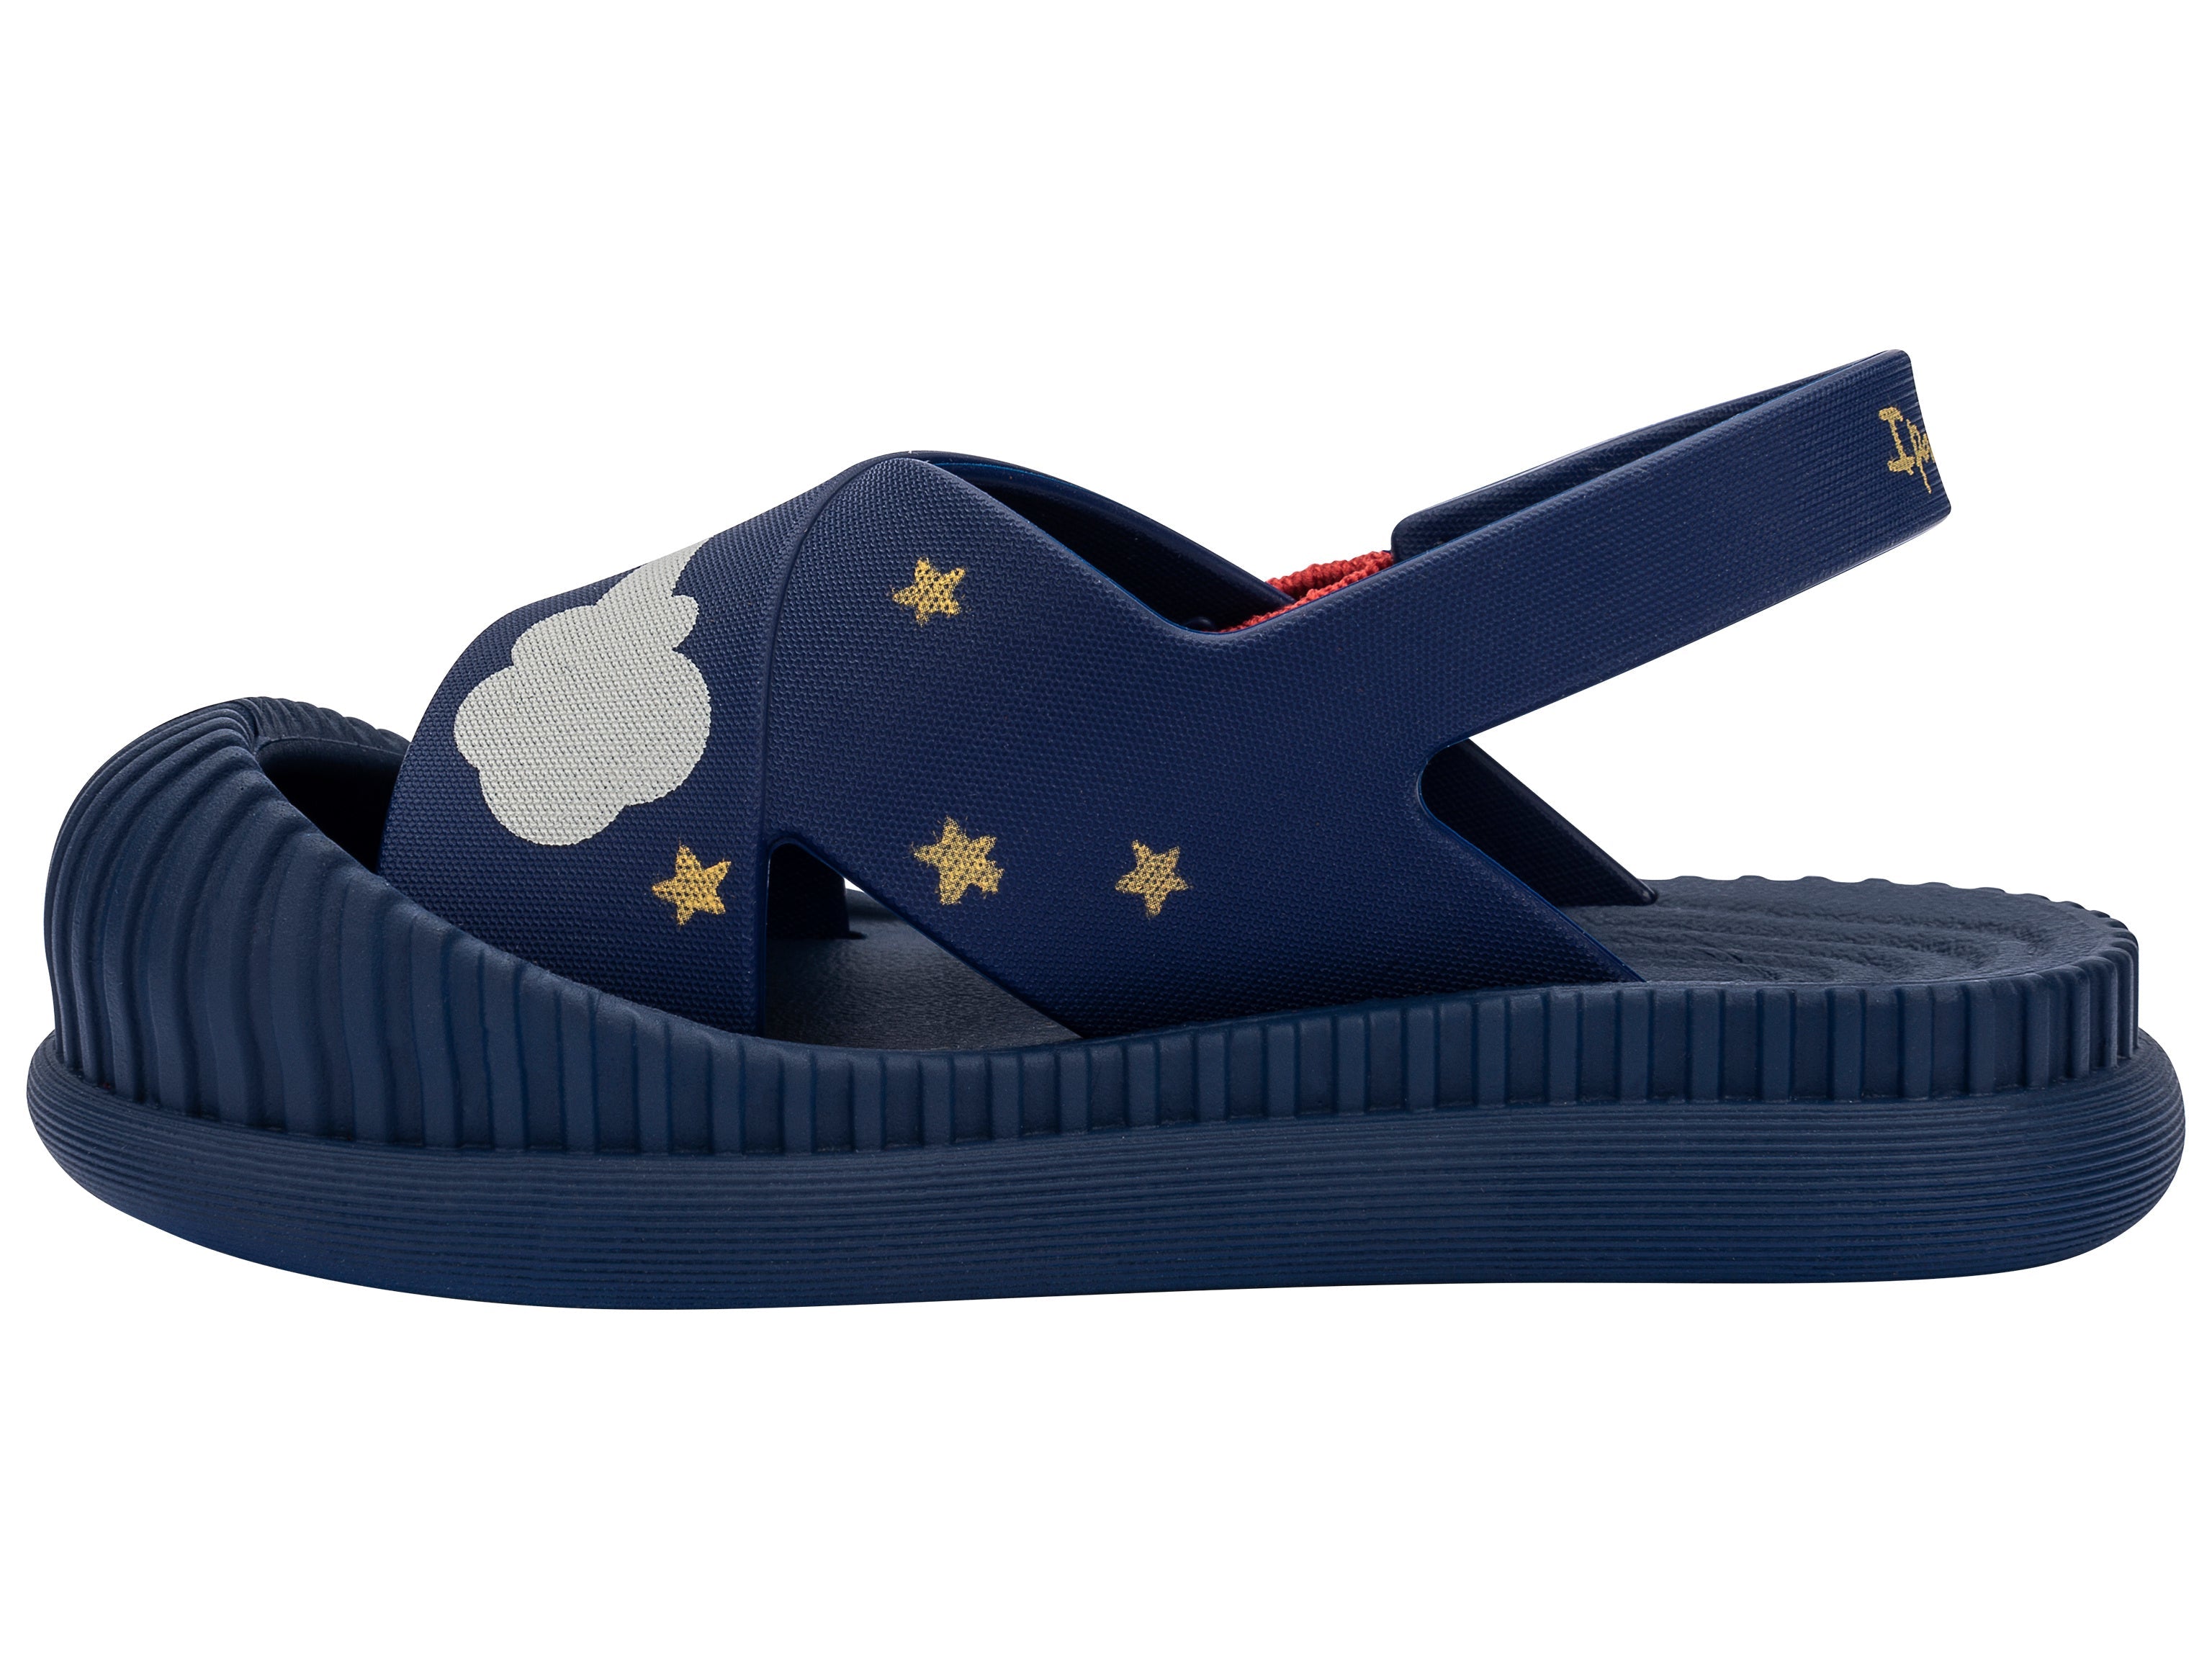 Inner side view of a blue Ipanema Cute baby sandal with rocket ship on the strap.